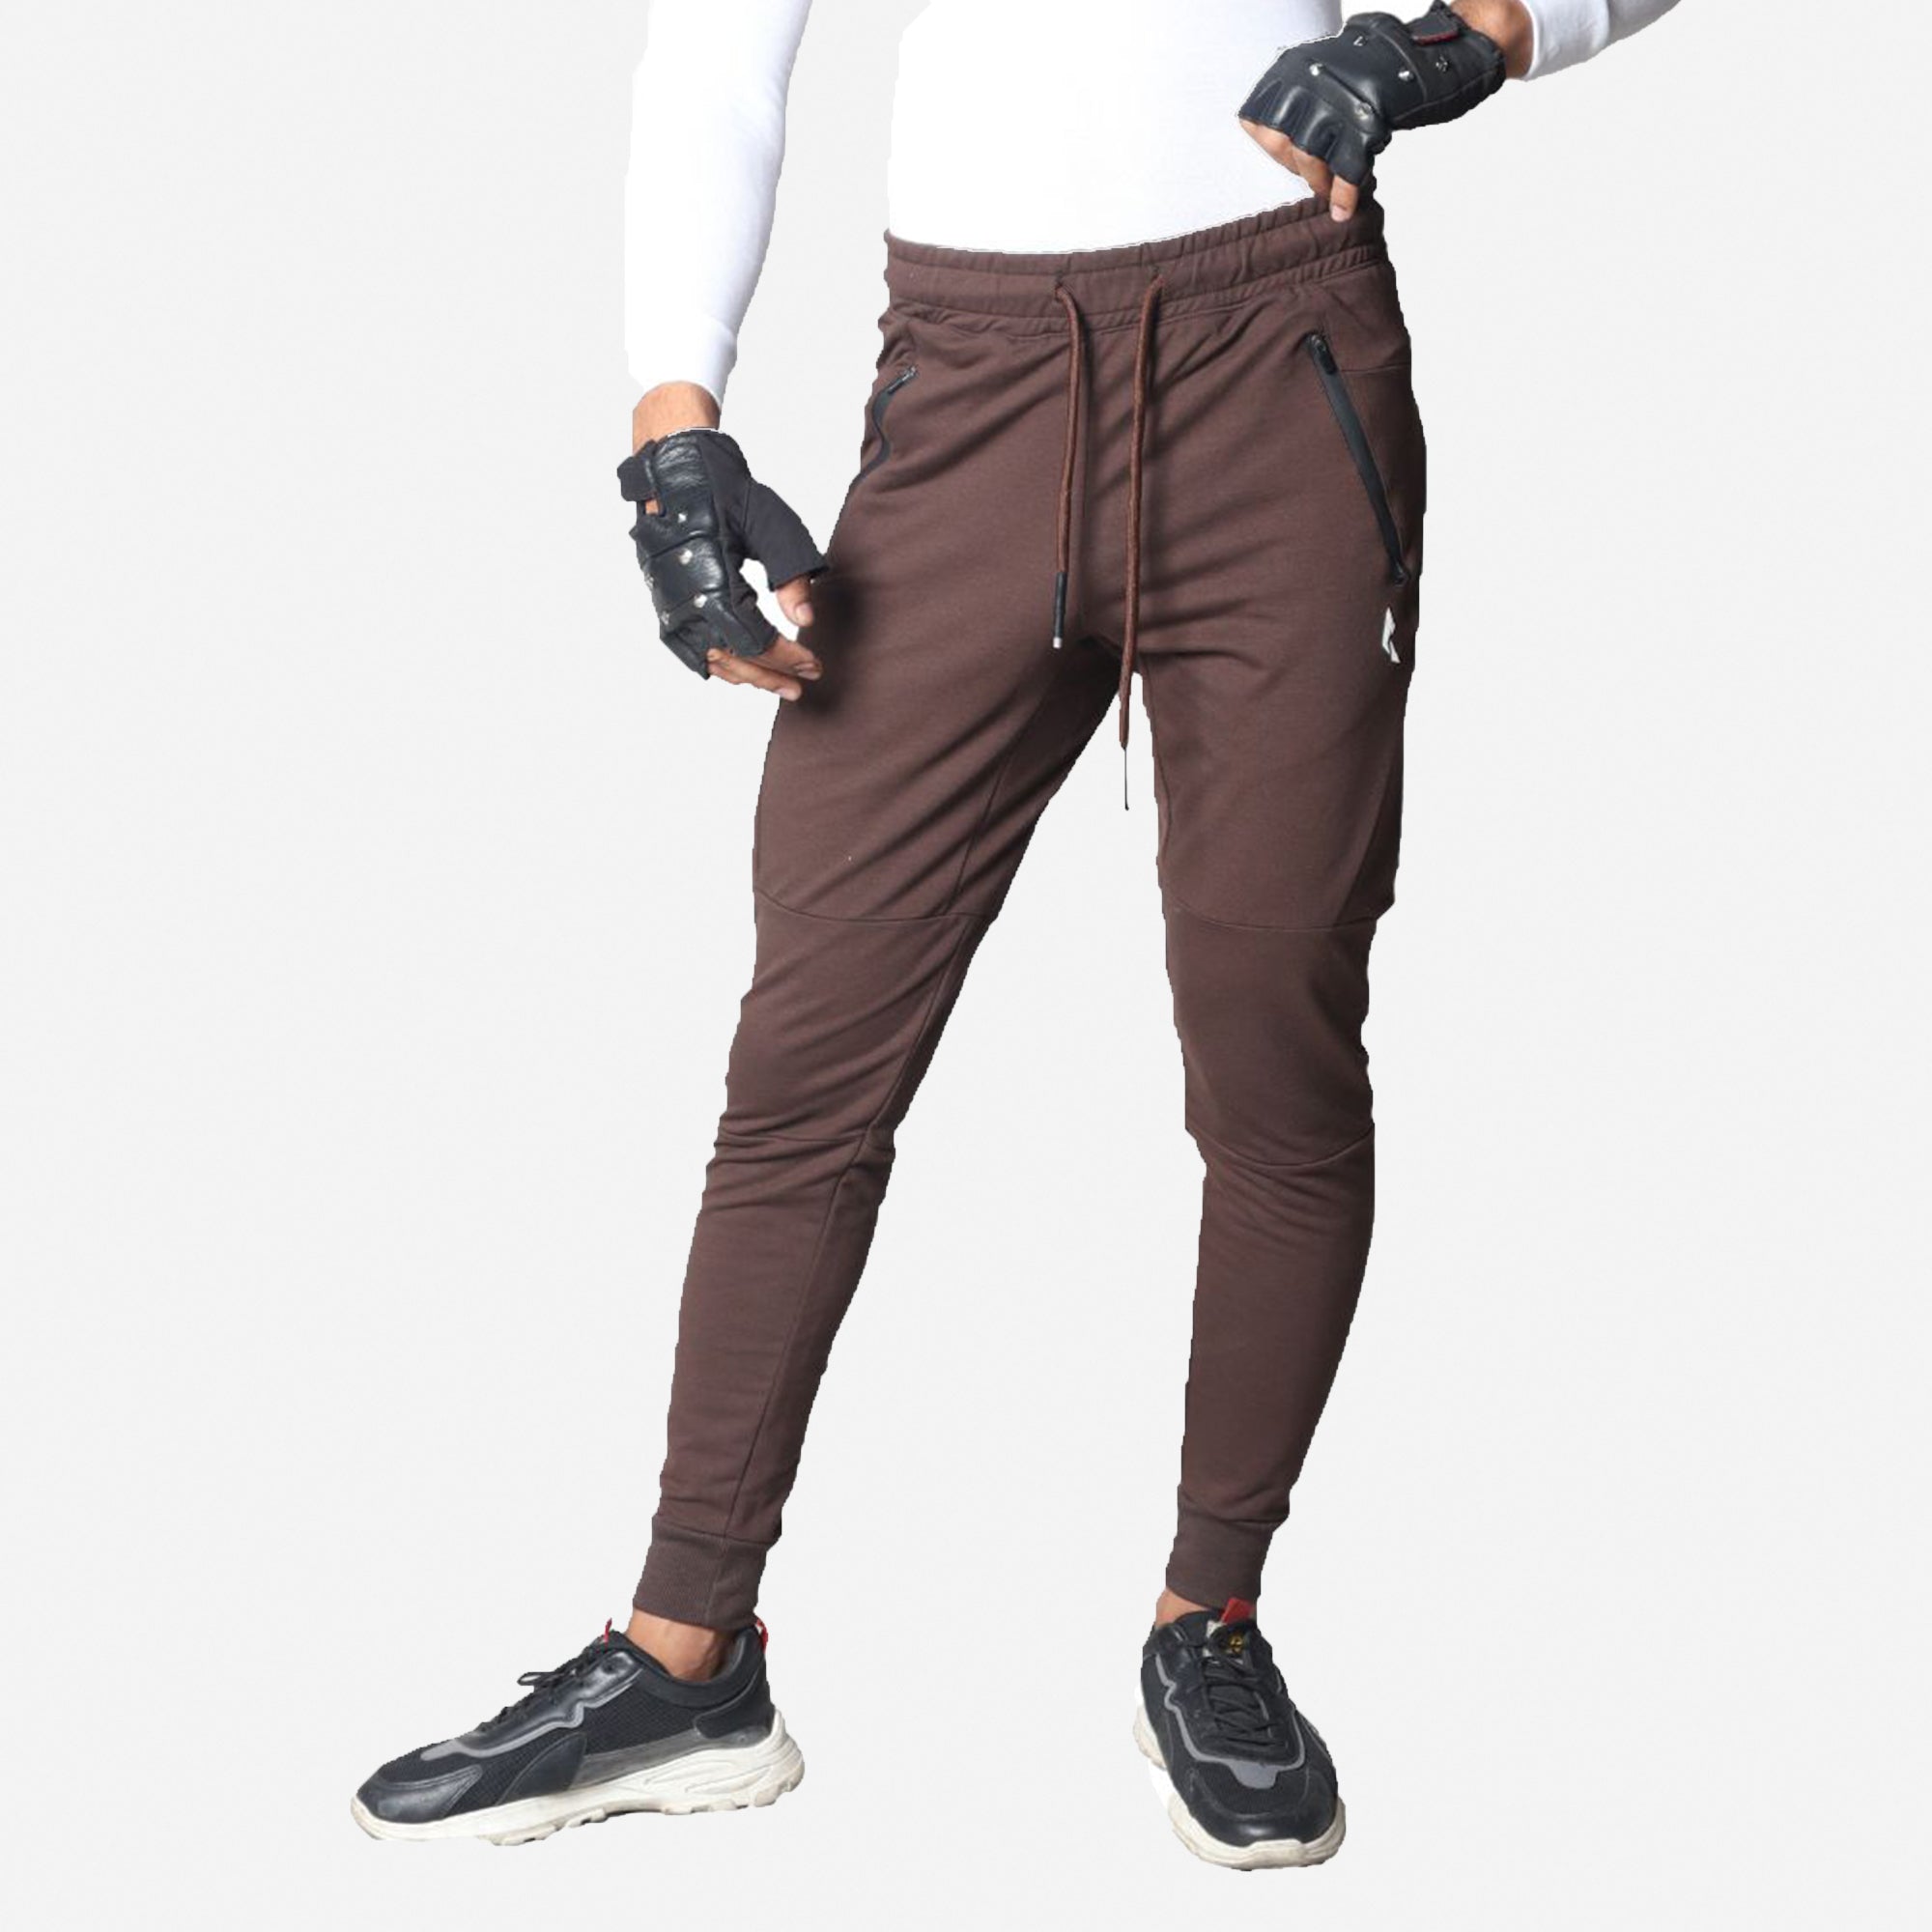 French Terry Trousers For Sports Casual Fitness Jogging - Brown